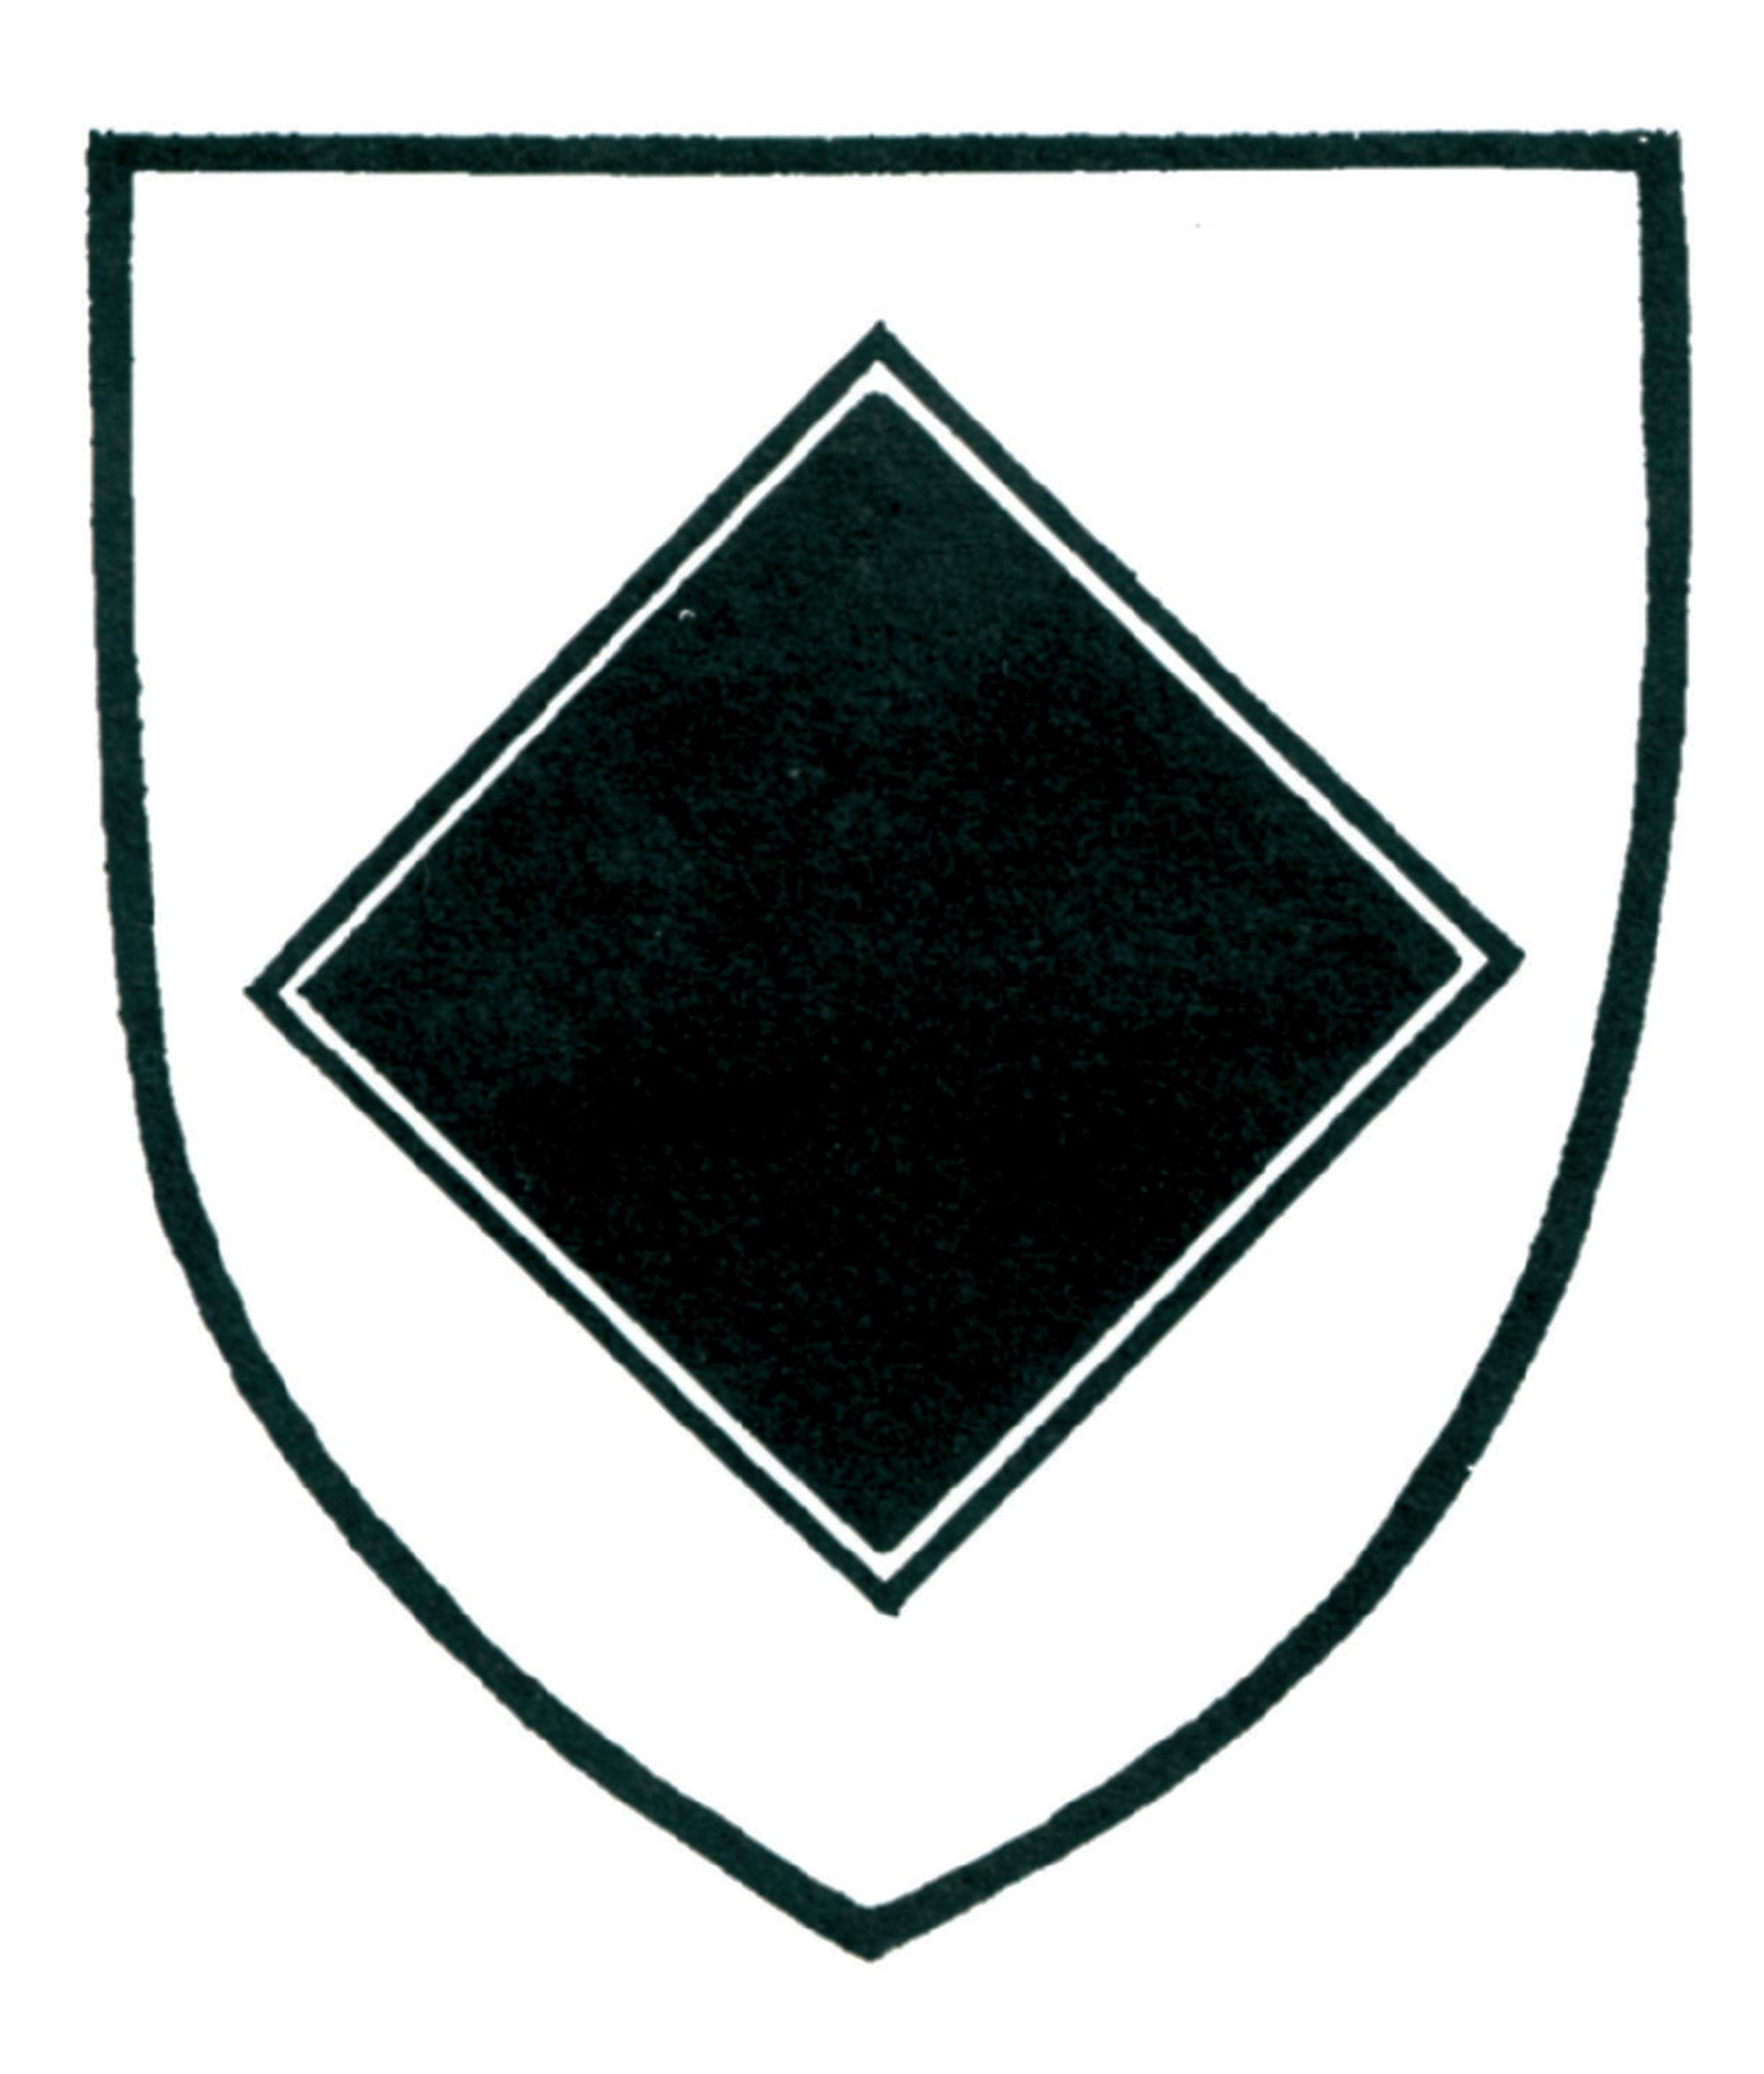 A drawing of a lozenge form from heraldry.